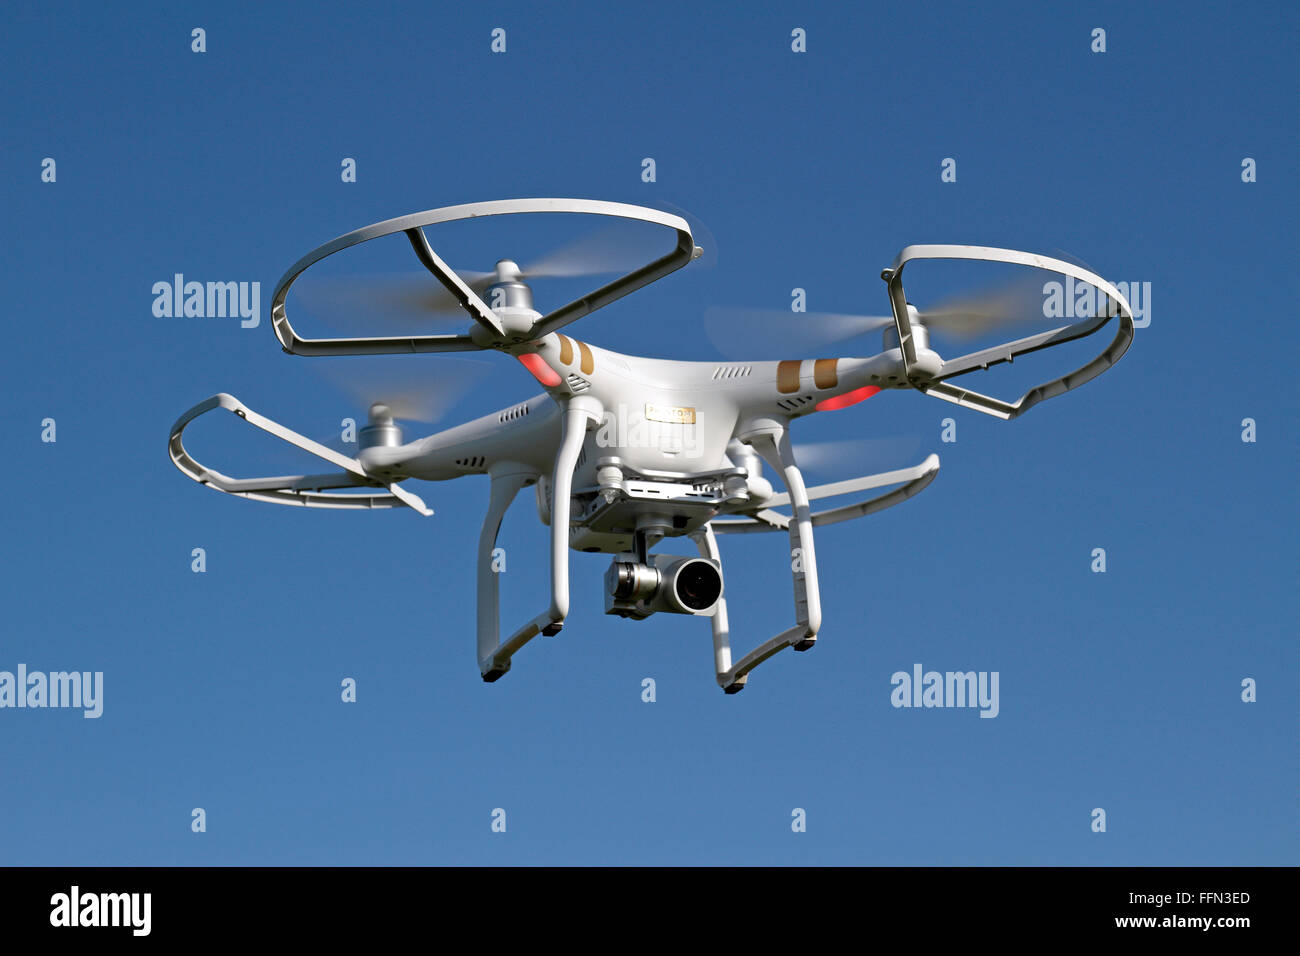 A DJI Phantom 3 Professional quadcopter (or drone) with safety prop guards  attached Stock Photo - Alamy